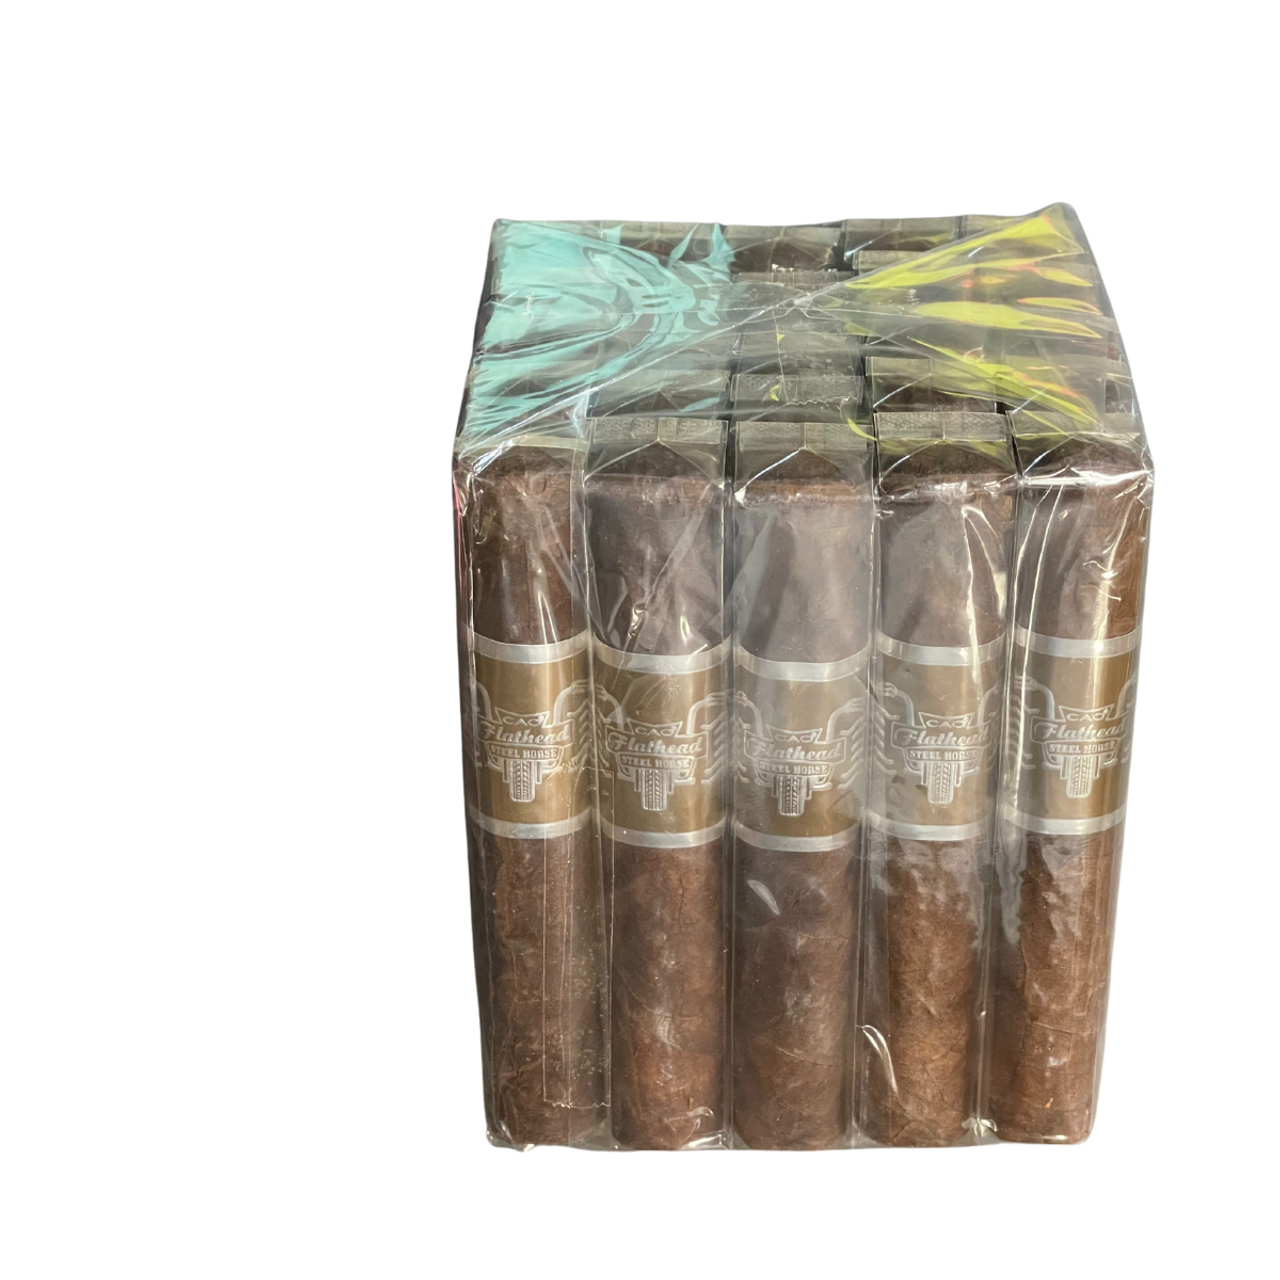 CAO Flathead Steel Horse Apehanger ( 5.5 X 58 ) Bundle of 25 priced right & FREE shipping from cigarsamplers.com BOOM!!!